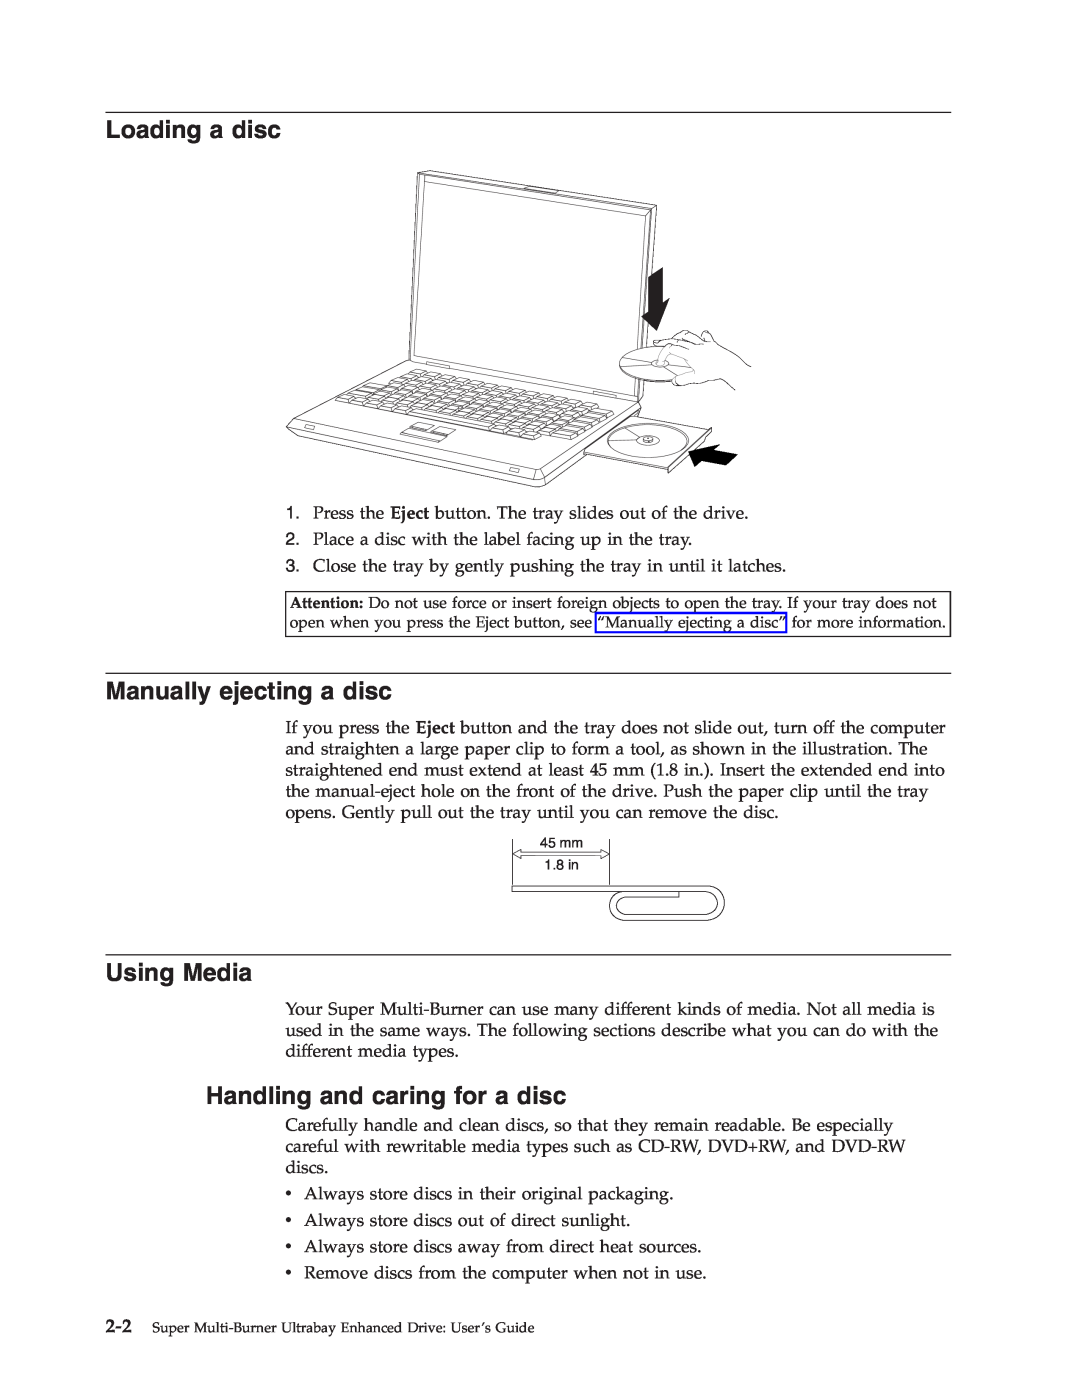 Lenovo 40Y8710 manual Loading a disc, Manually ejecting a disc, Using Media, Handling and caring for a disc 